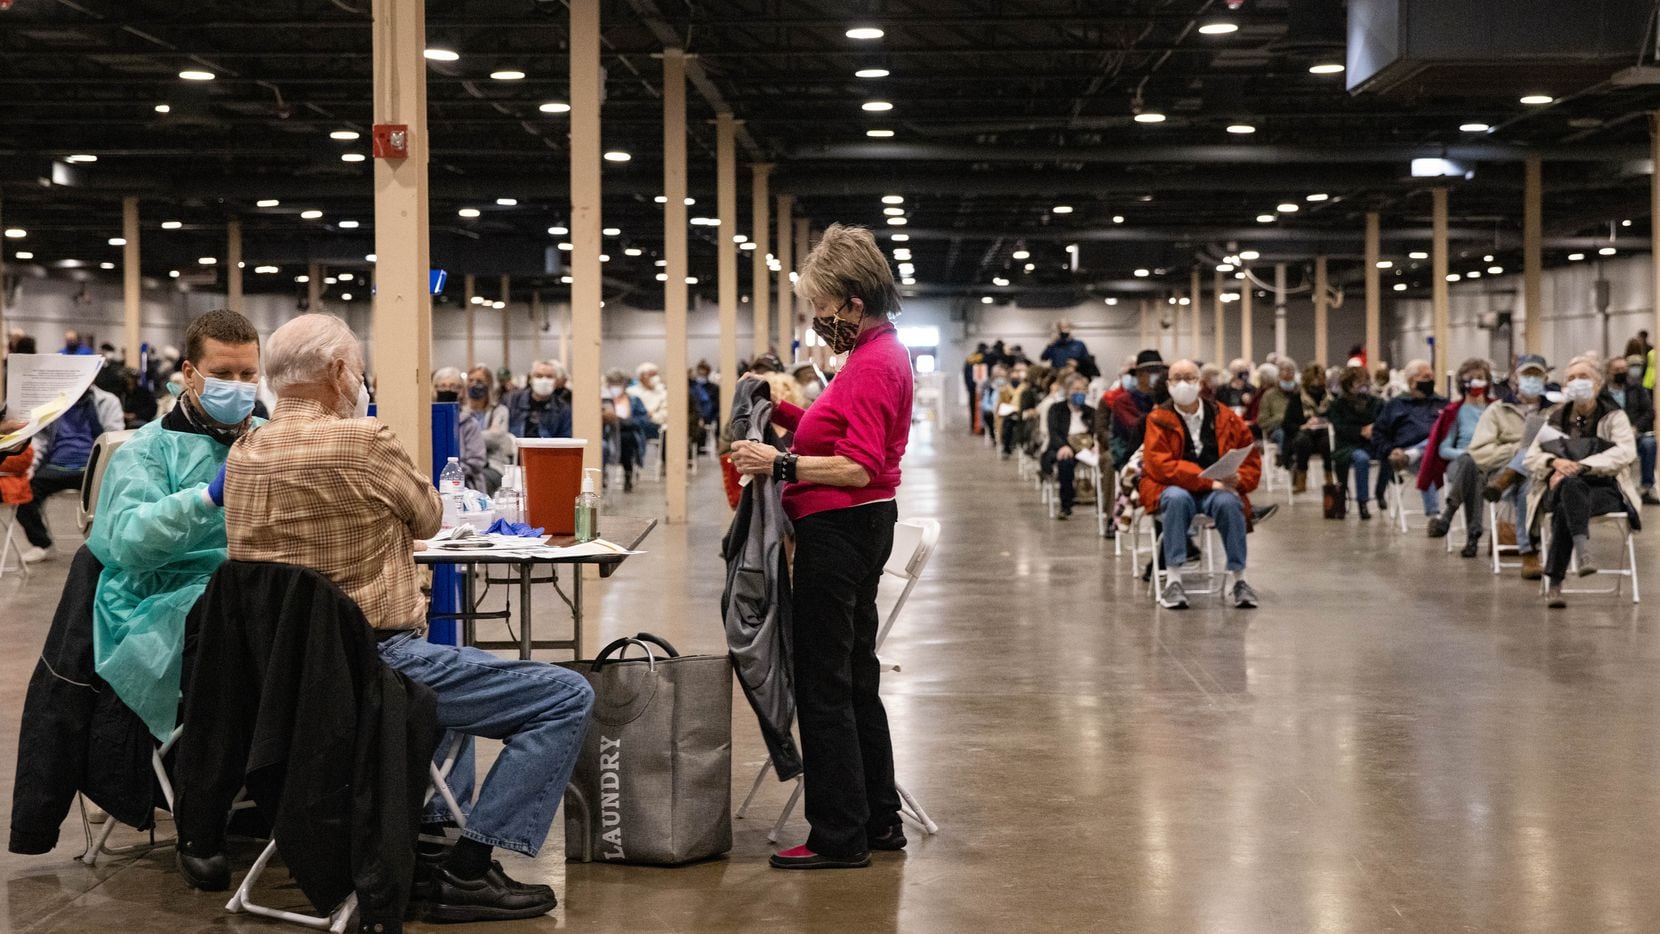 People wait to receive the COVID-19 vaccine at Fair Park in Dallas on Thursday, Jan. 14, 2021. (Juan Figueroa/ The Dallas Morning News)